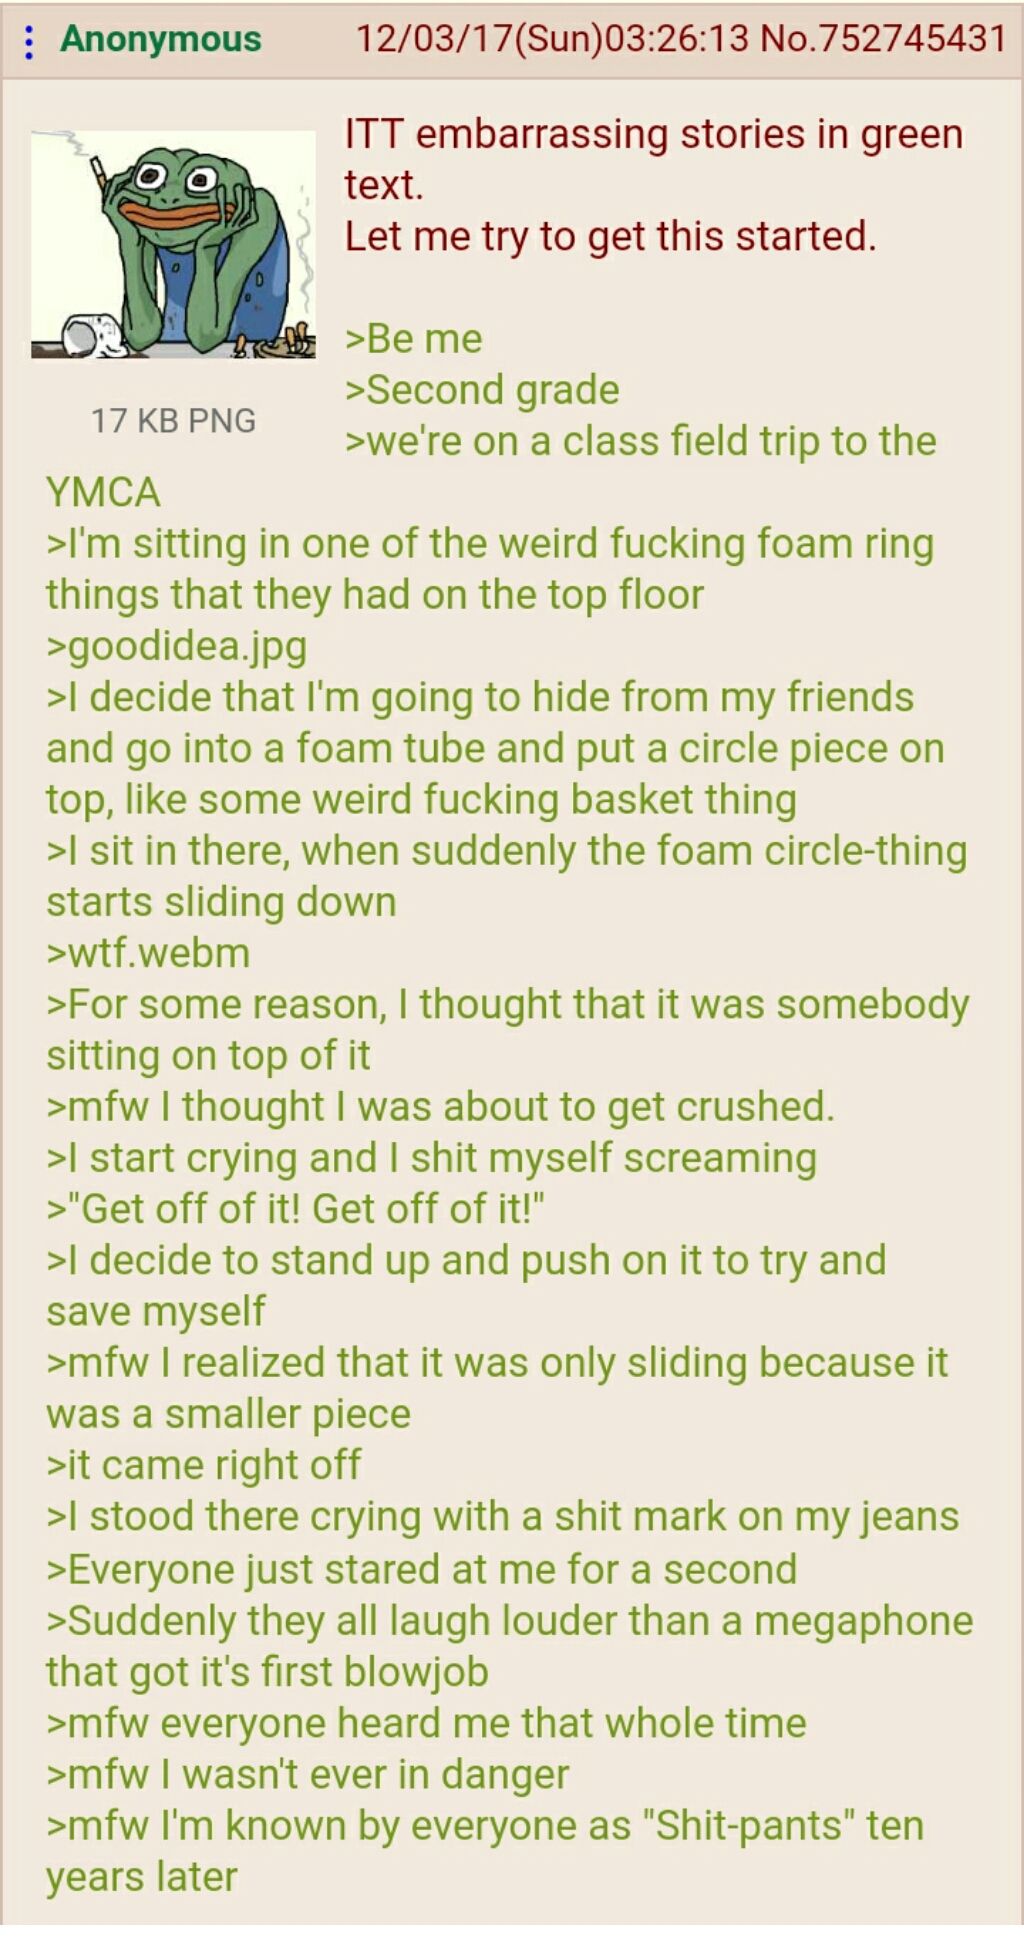 Anon is the shit kid